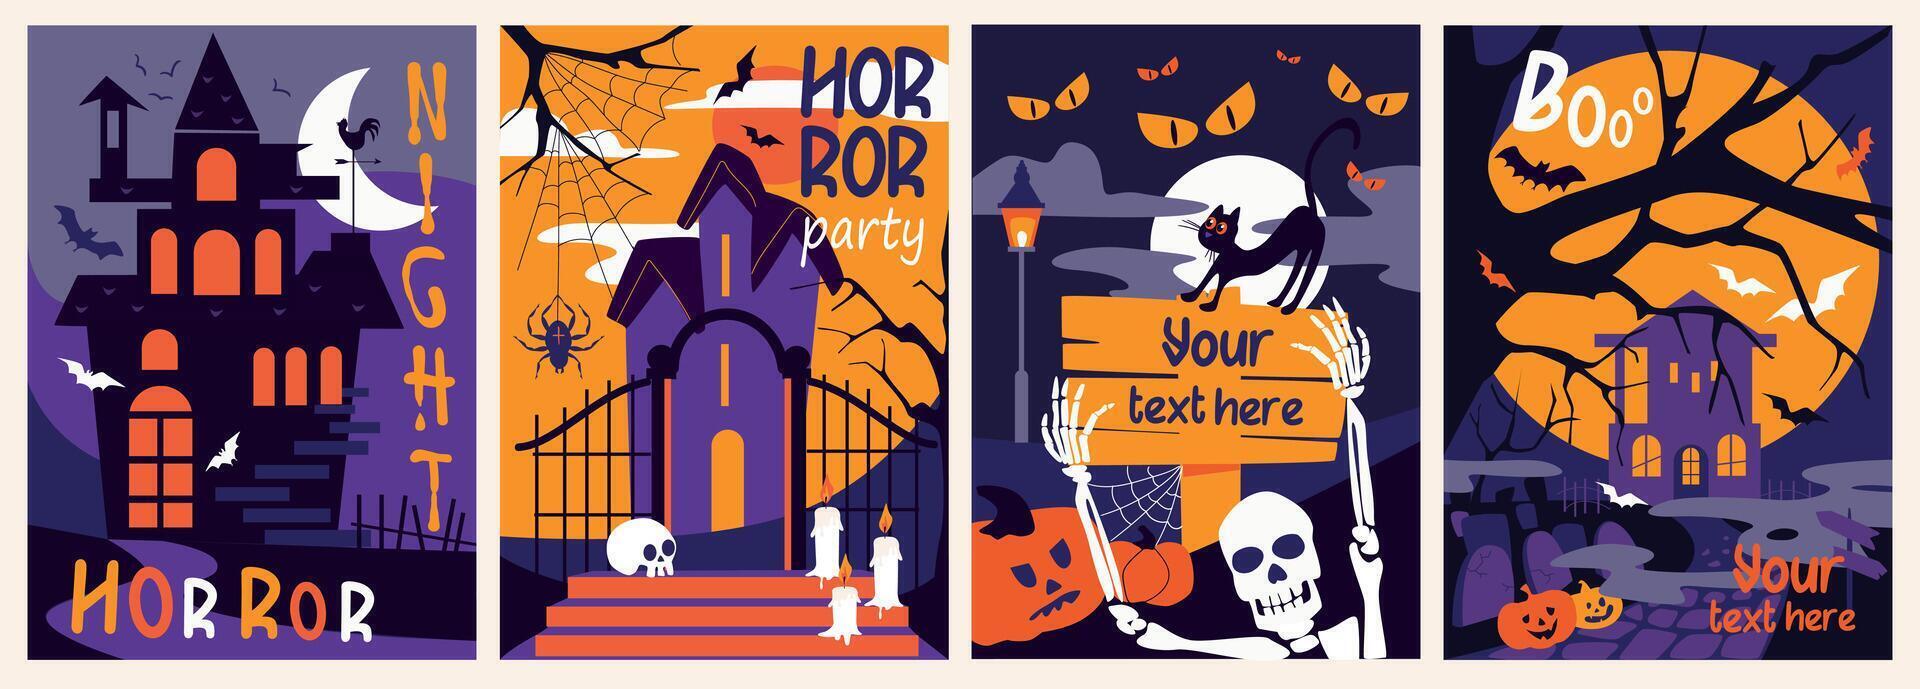 Halloween holiday cover brochure set in trendy flat design. Poster templates with night horror party symbols, old houses, flying bats, web with spiders, skeletons and pumpkins. Vector illustration.